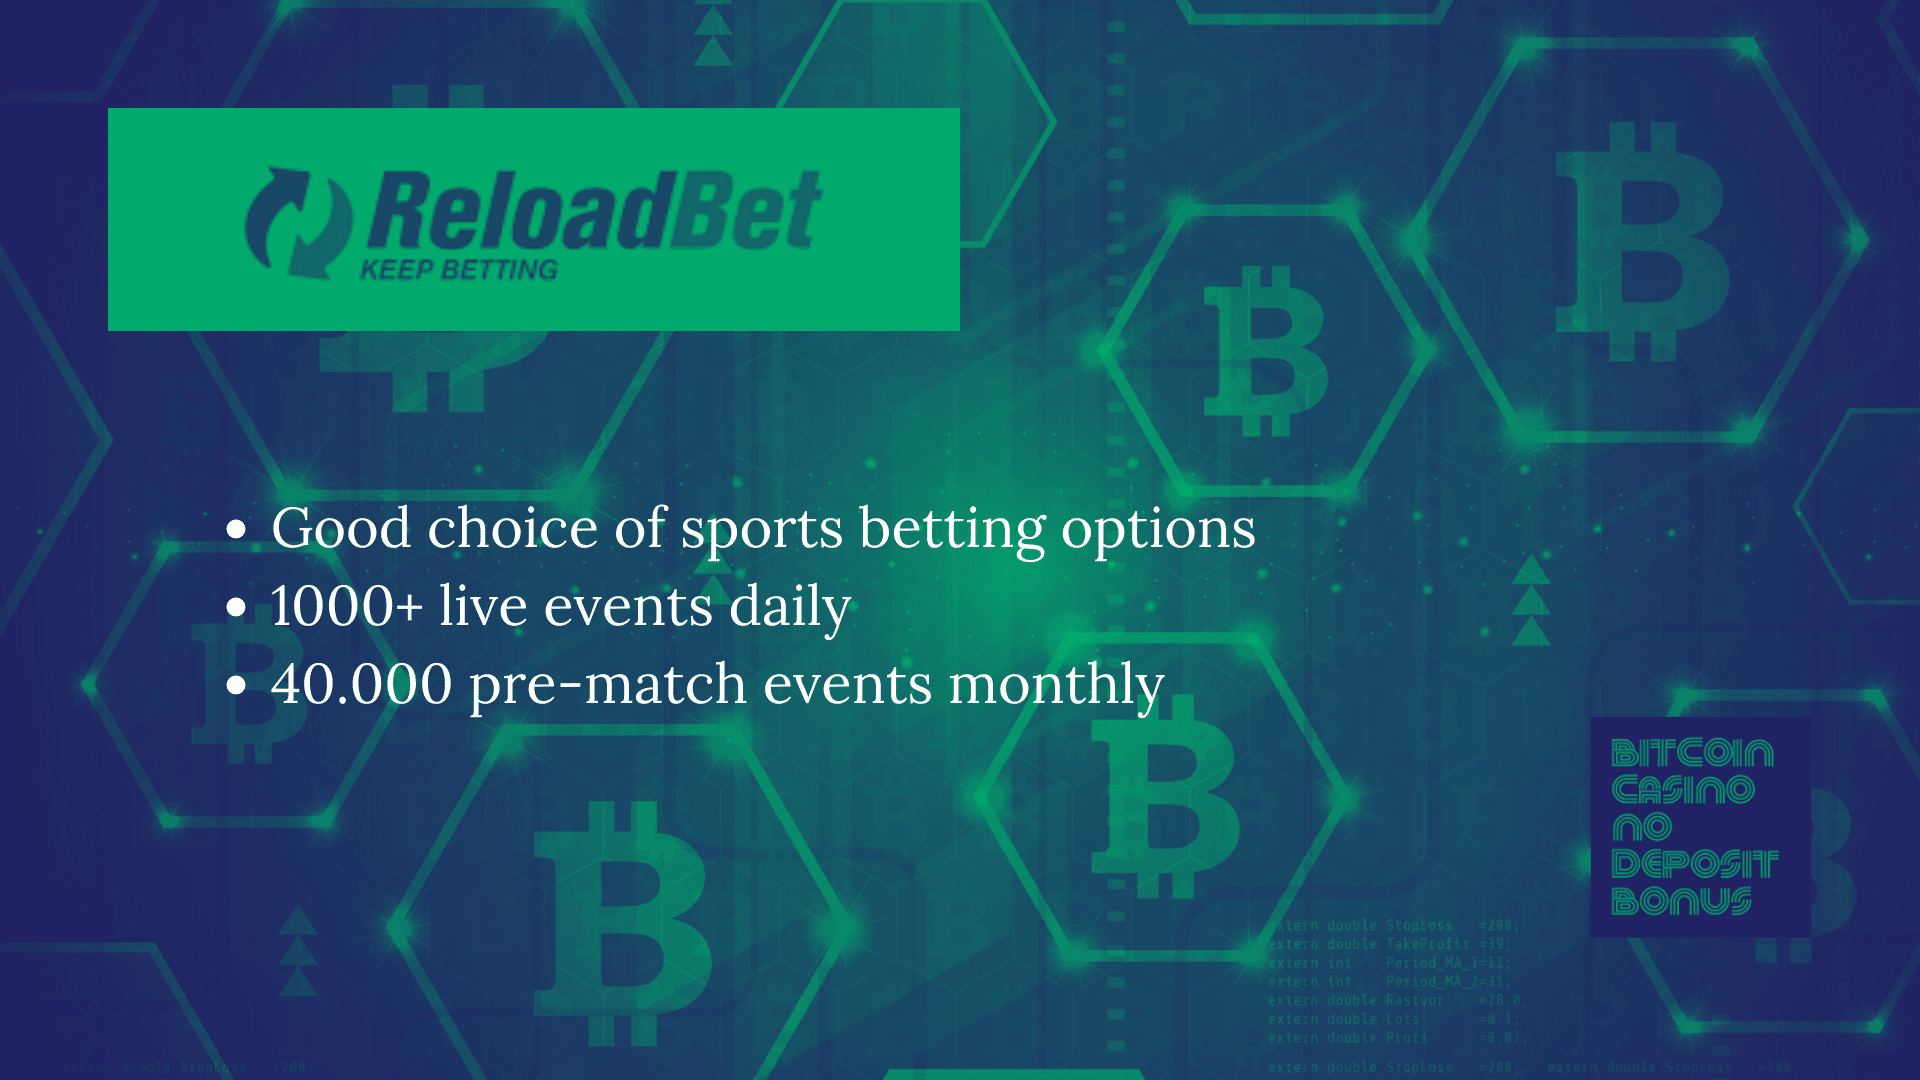 You are currently viewing ReloadBet Promo Codes – ReloadBet.com Free Coupons June 2022